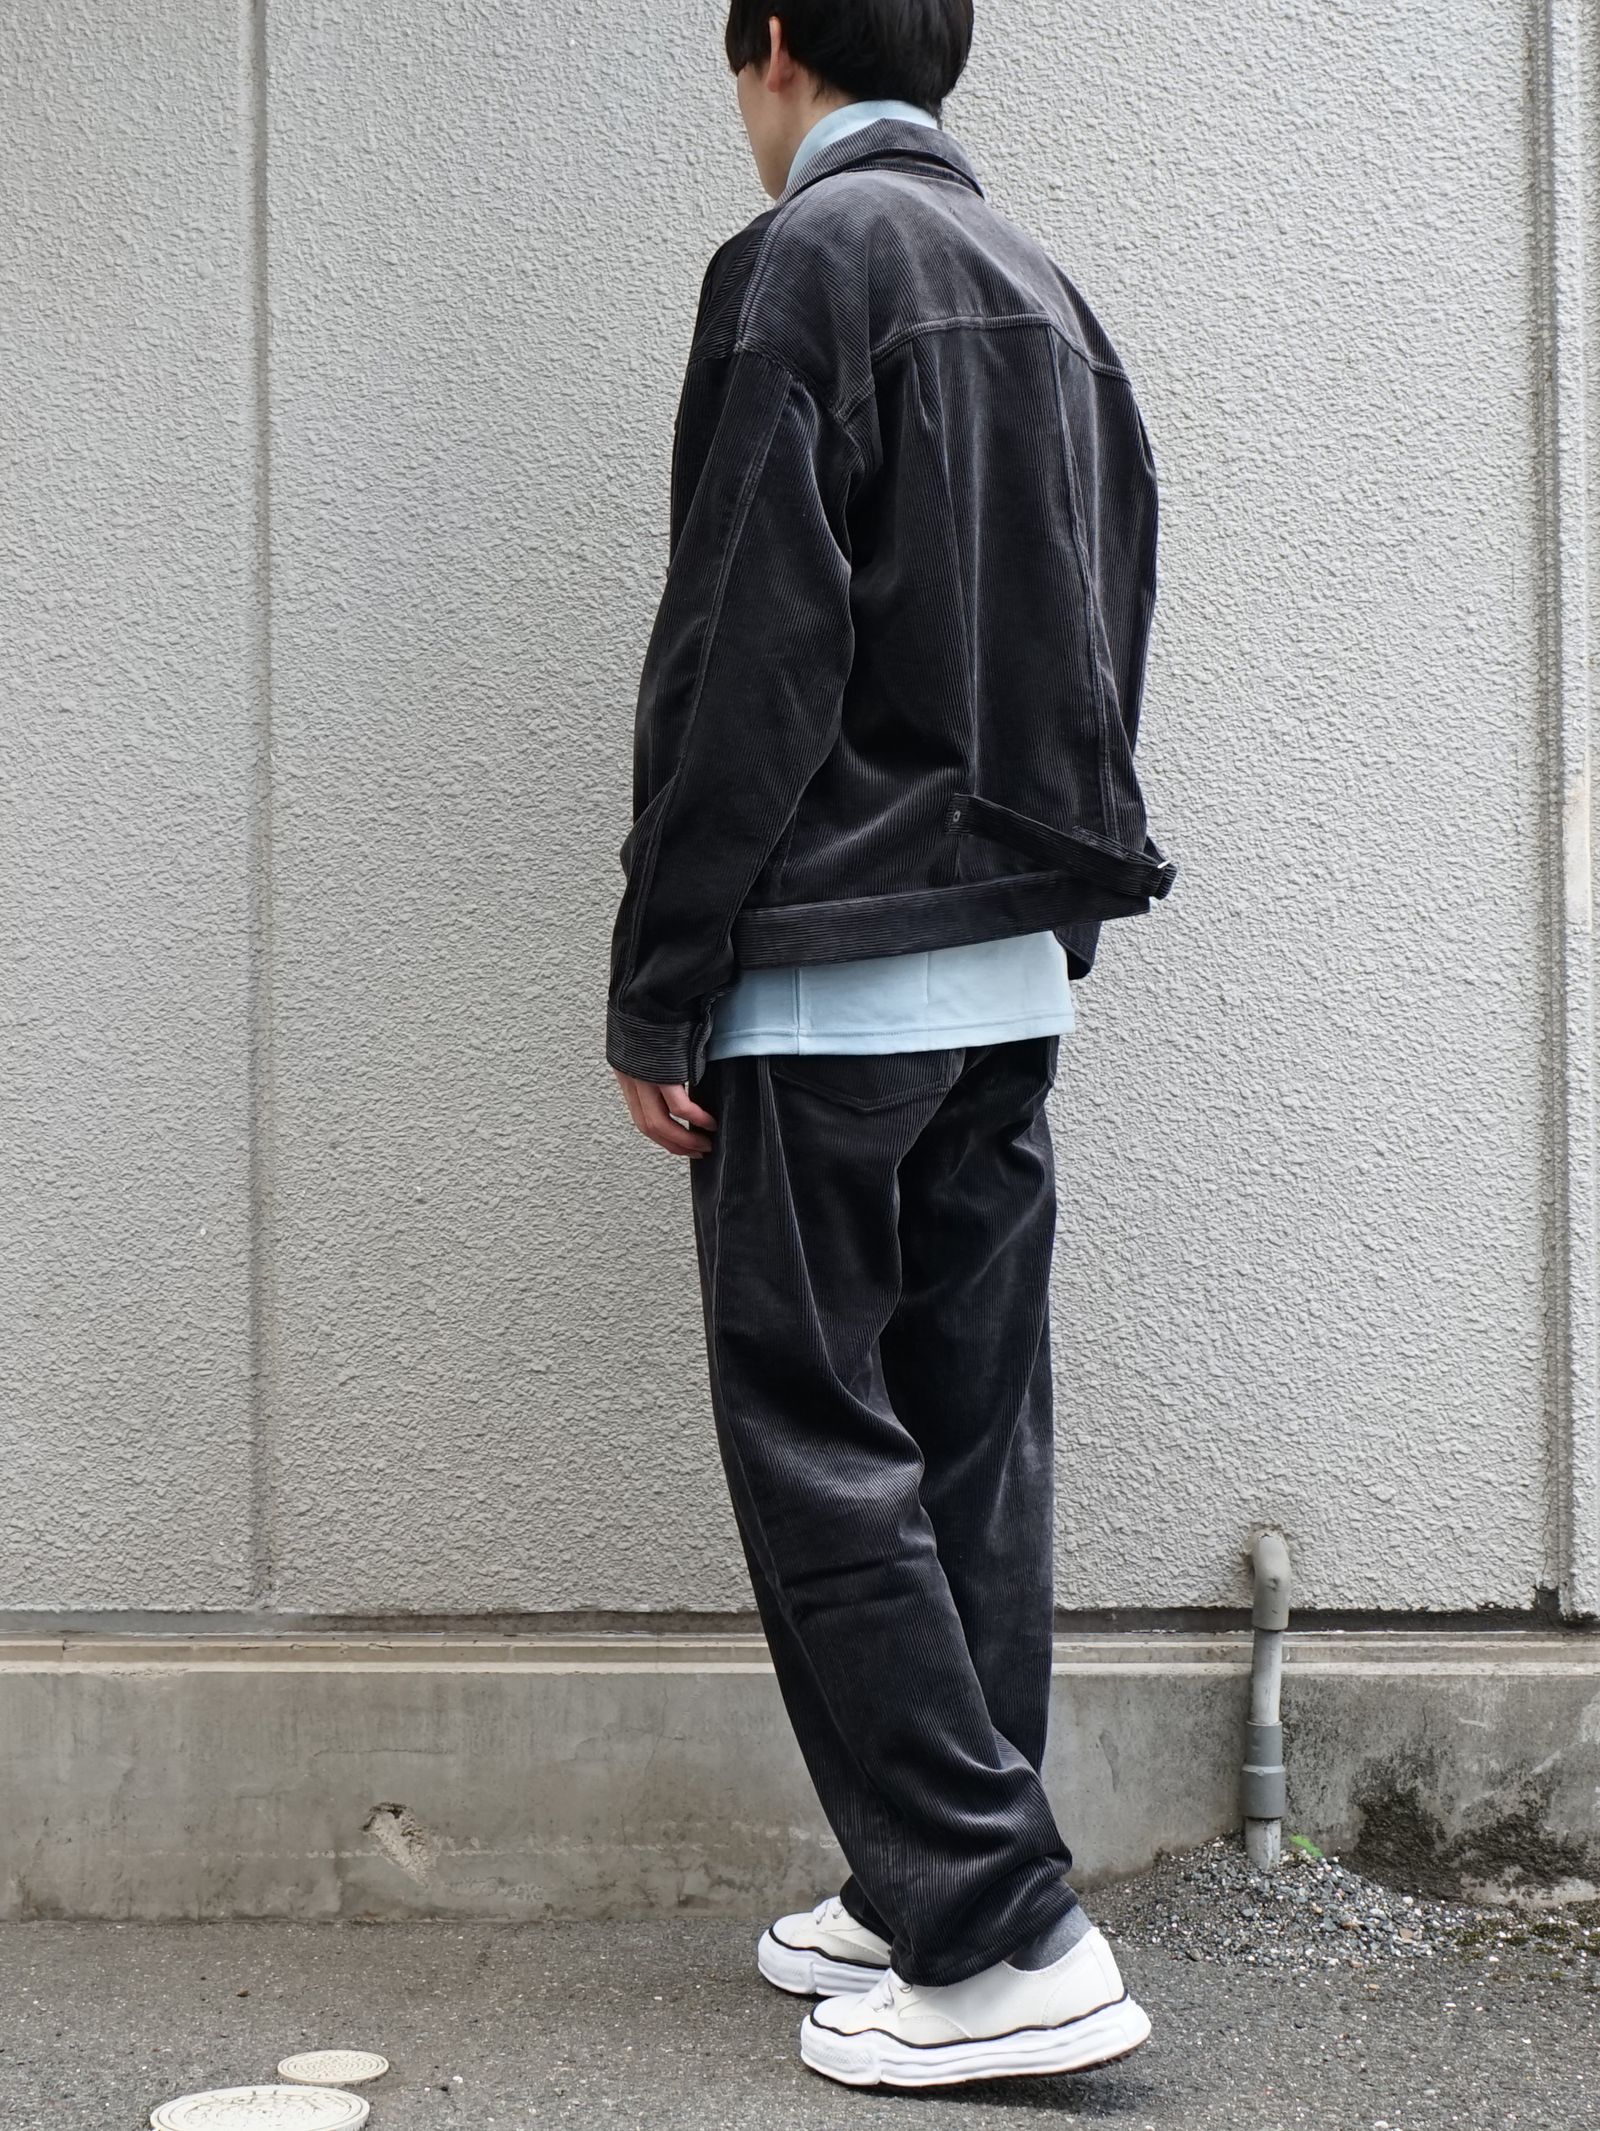 SEVEN BY SEVEN - 【24-25AW】 コーデュロイ ジャケット - 1st Type 